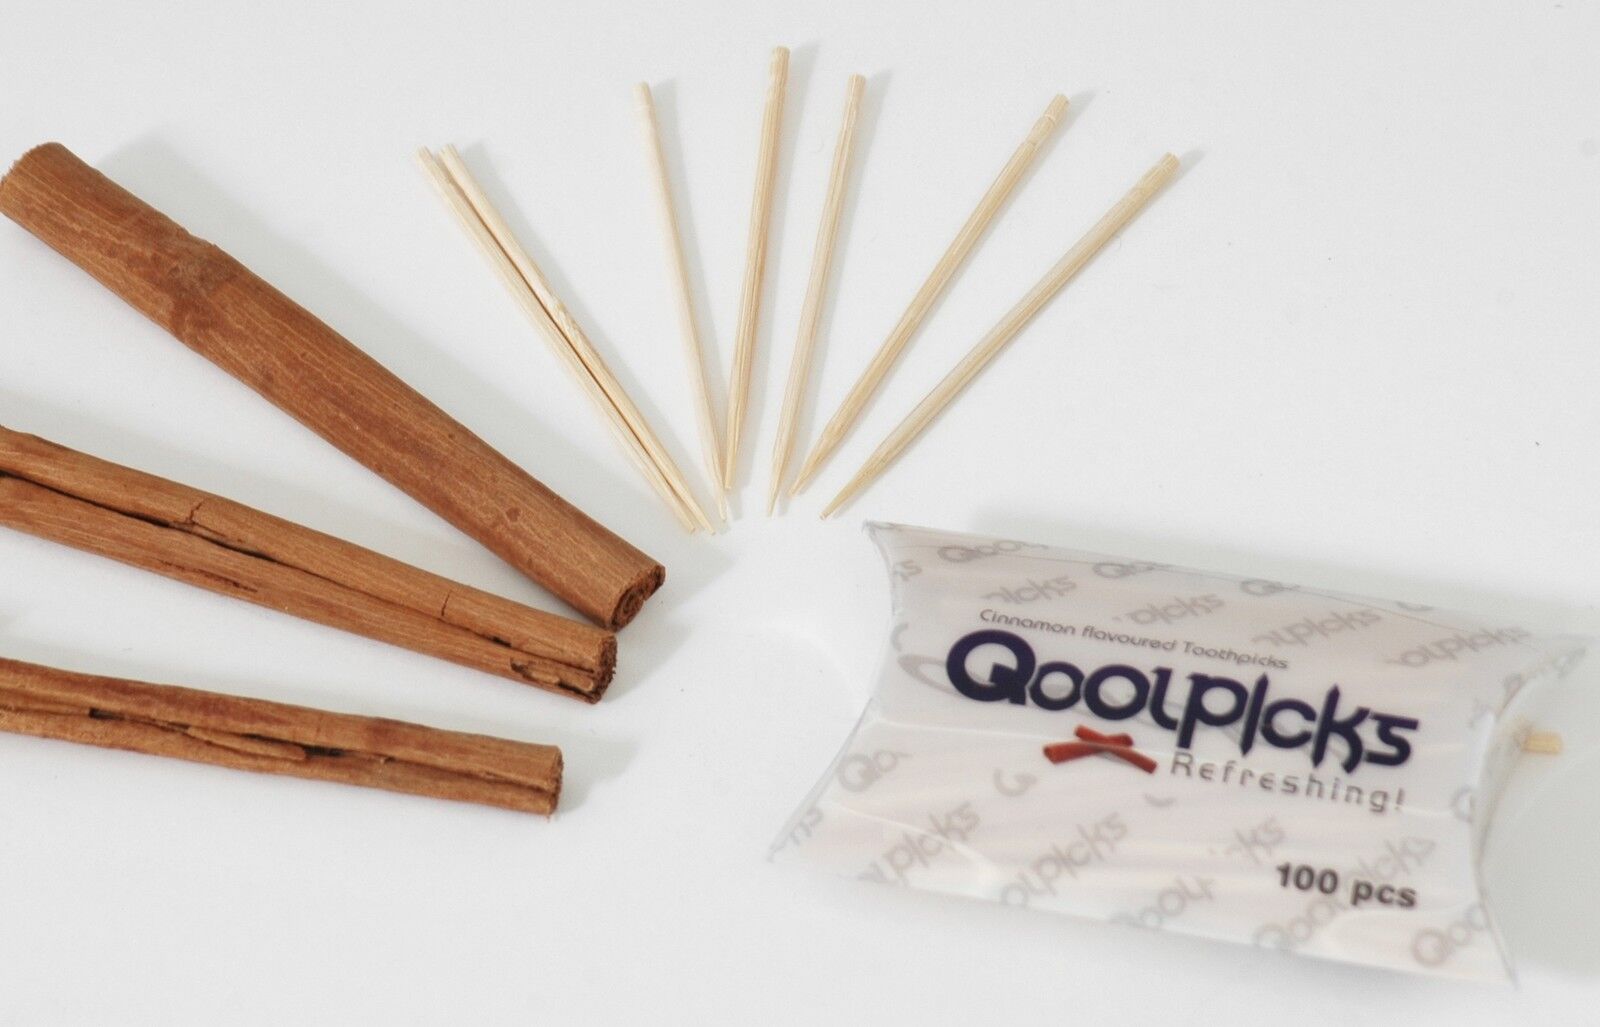 Qoolpicks Flavoured Toothpicks  BUY 2 GET 1 FREE OFFER See listing for details.